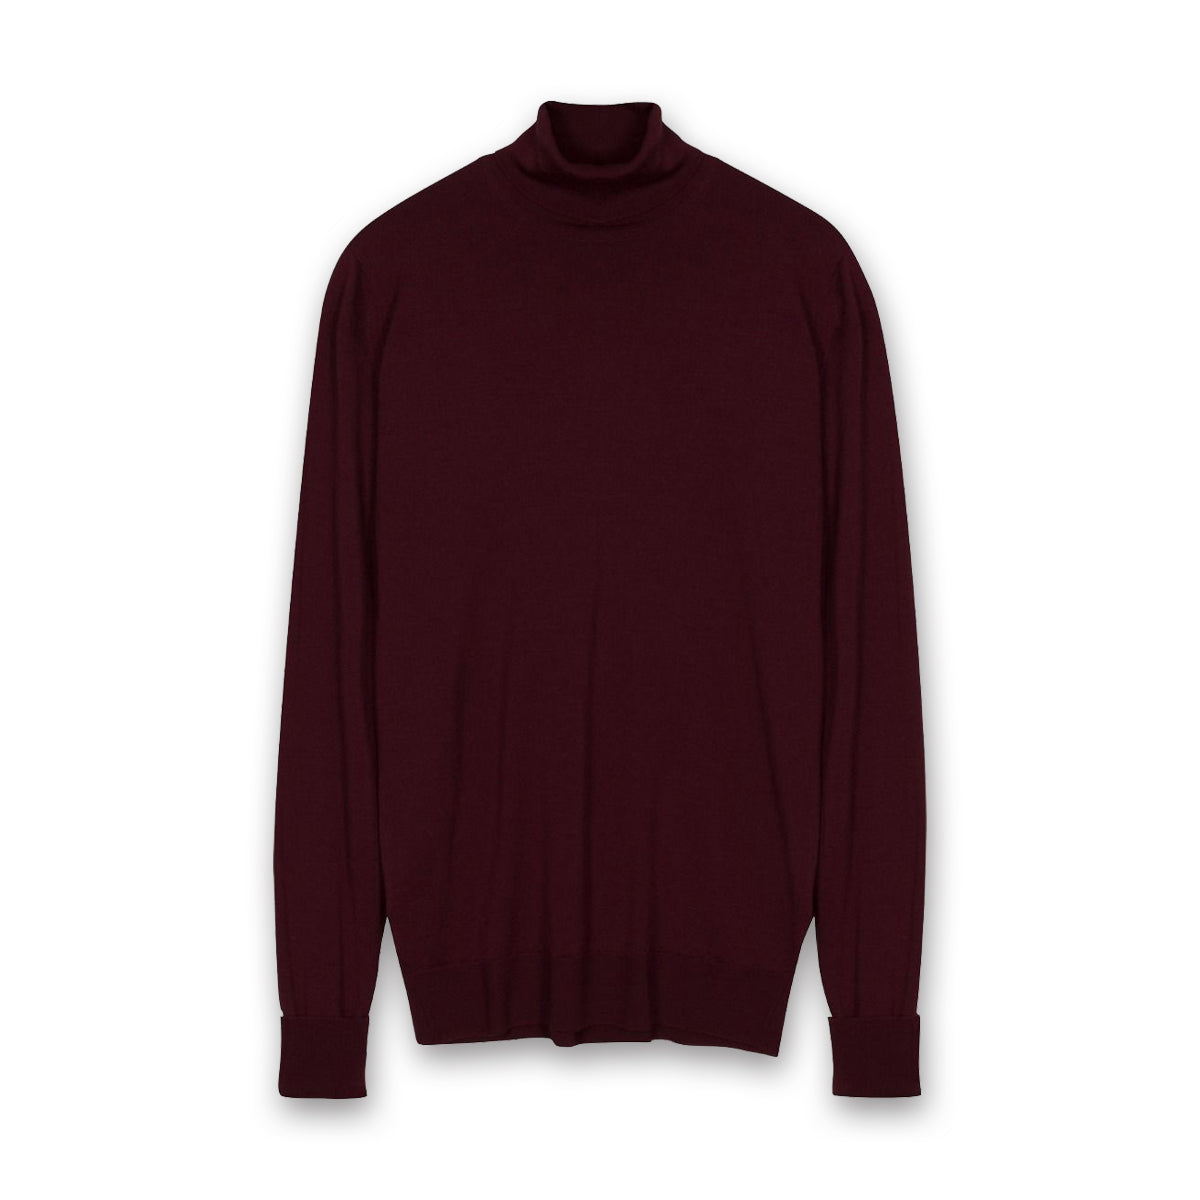 Men's Roll Neck Jumpers, Shop By Style, John Smedley